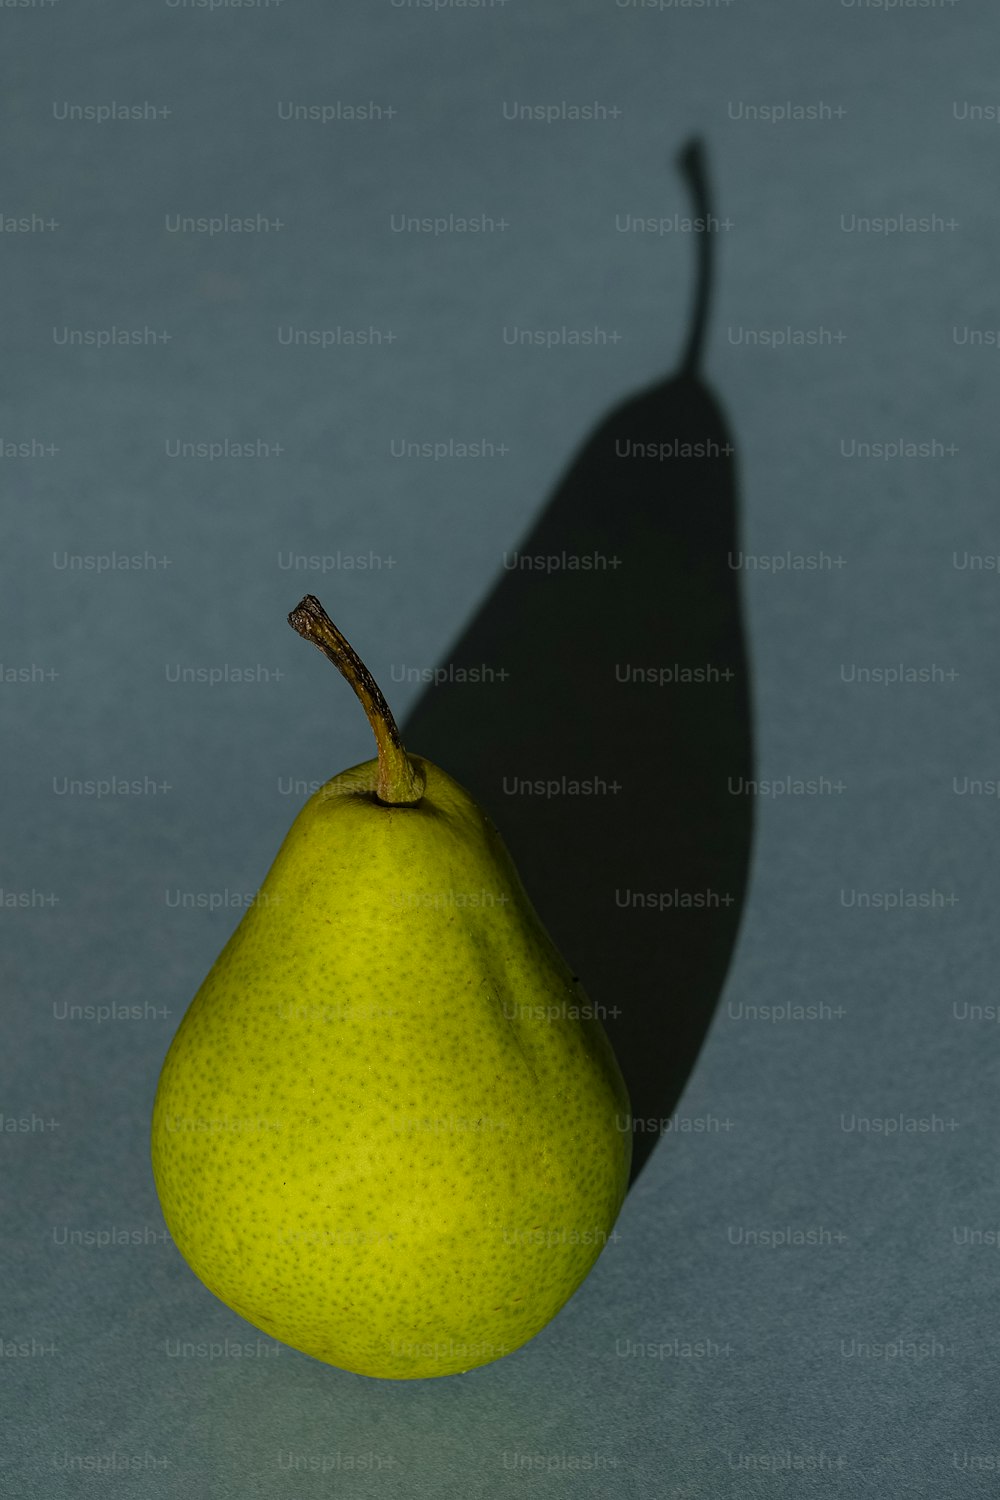 a single pear is casting a shadow on a blue surface